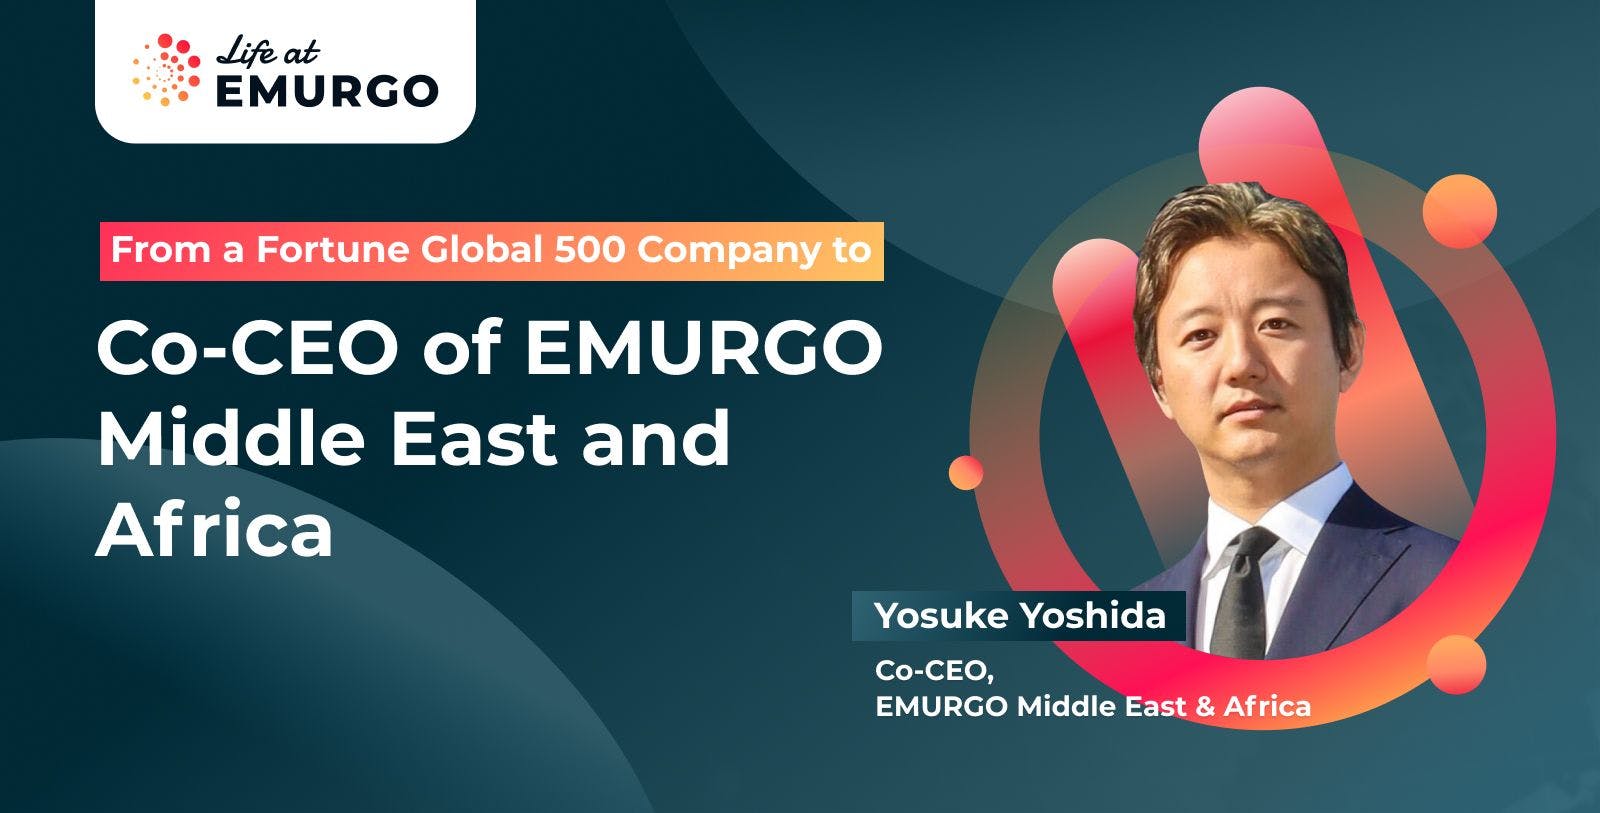 From a Fortune Global 500 Company to Co-CEO of EMURGO Middle East & Africa